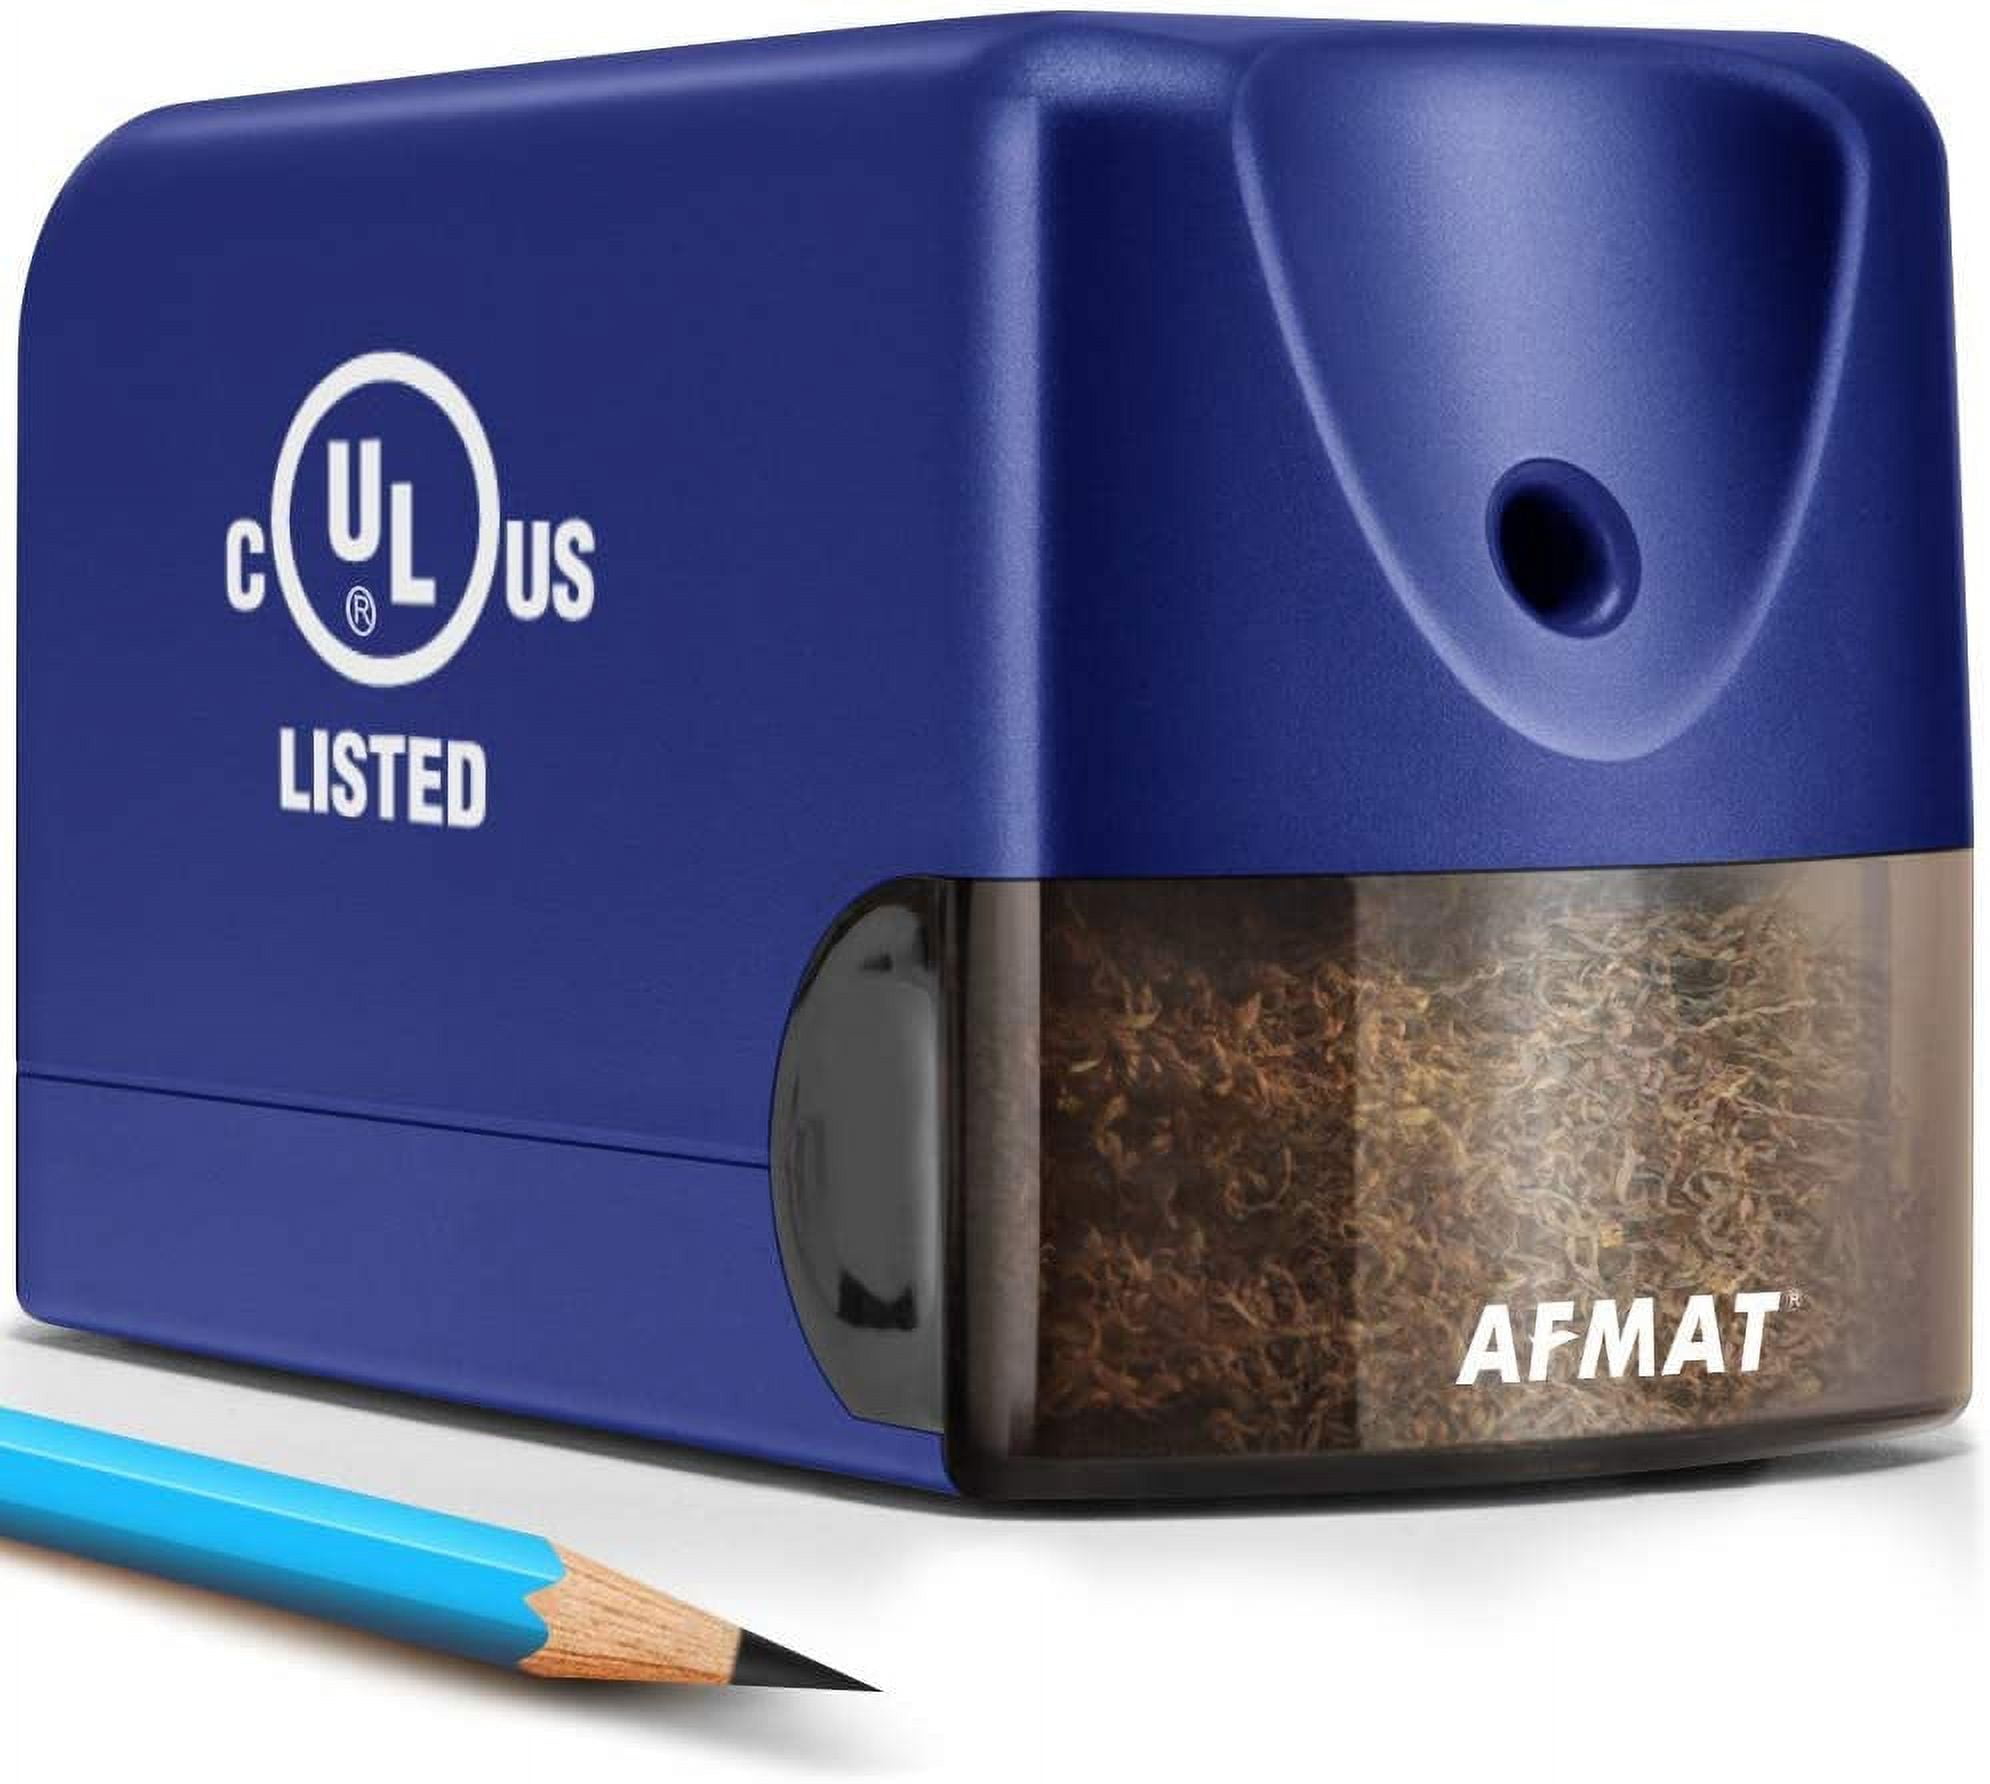 AFMAT Electric Pencil Sharpener Heavy Duty, Classroom Pencil Sharpener for  6.5-8mm No.2/Colored Pencils, UL Listed Professional Pencil Sharpener  w/Stronger Helical Blade, Gray 